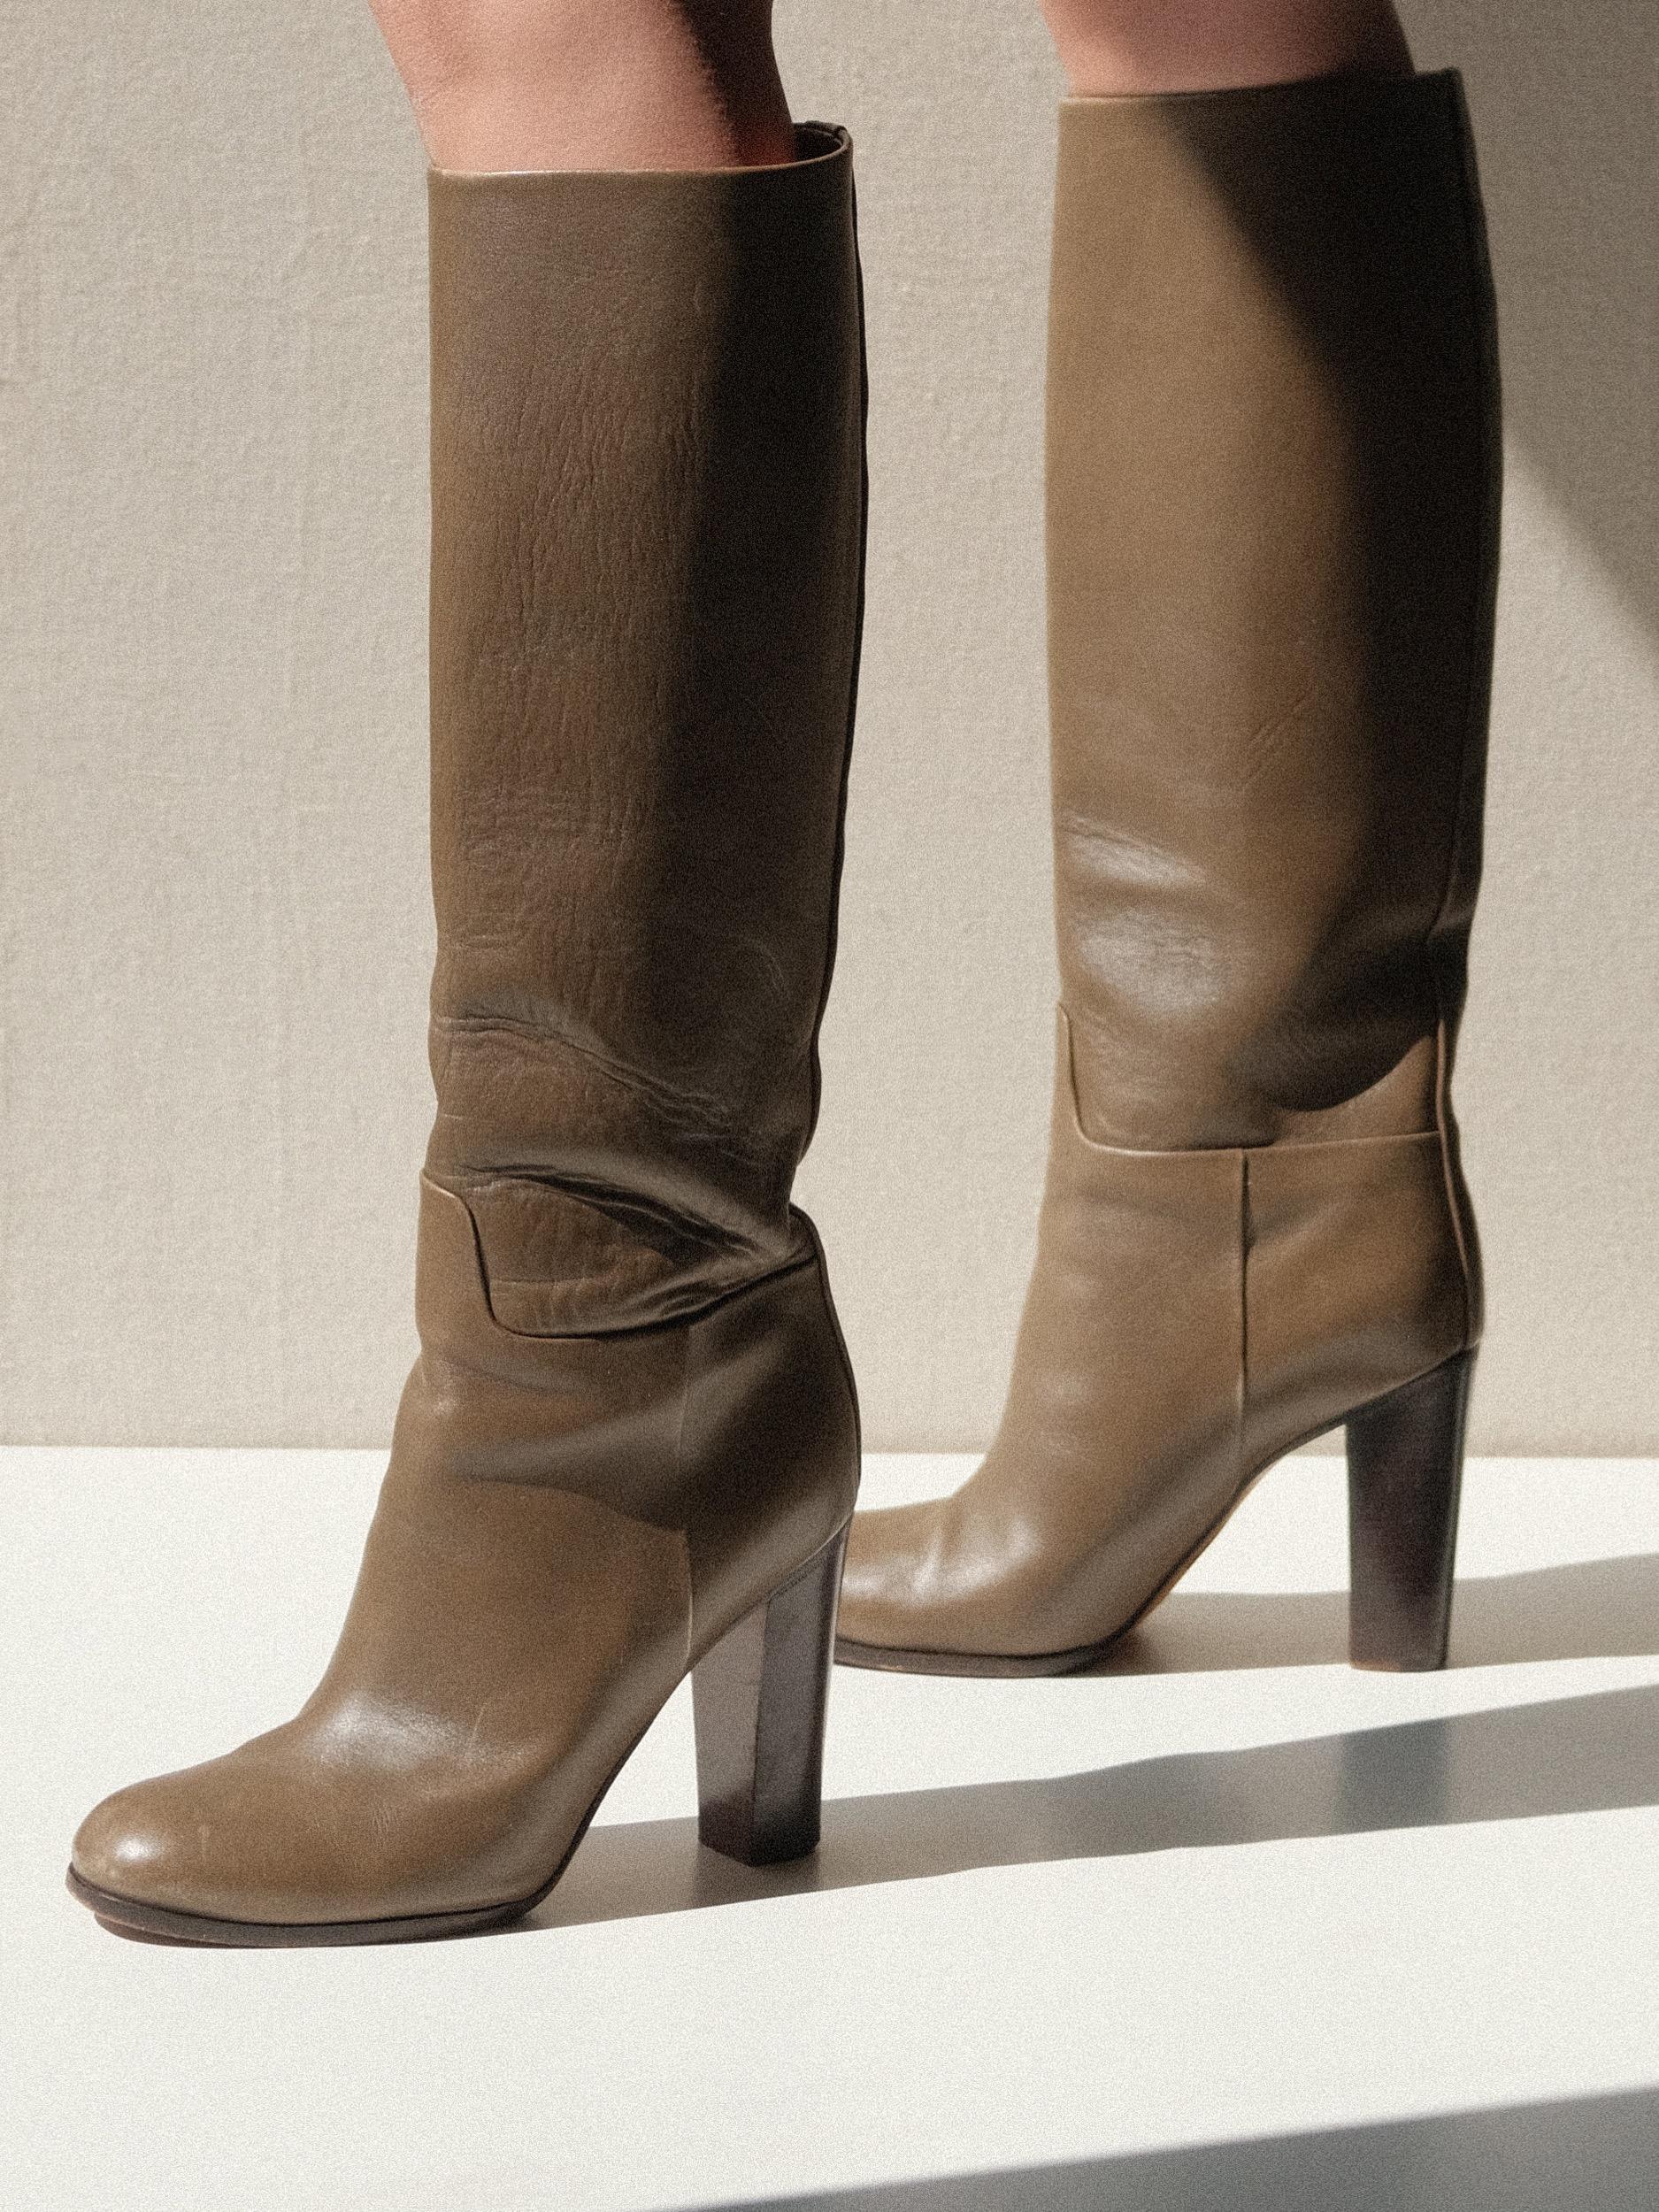 Green Leather Céline Phoebe Philo Knee High Boots 38 For Sale 2